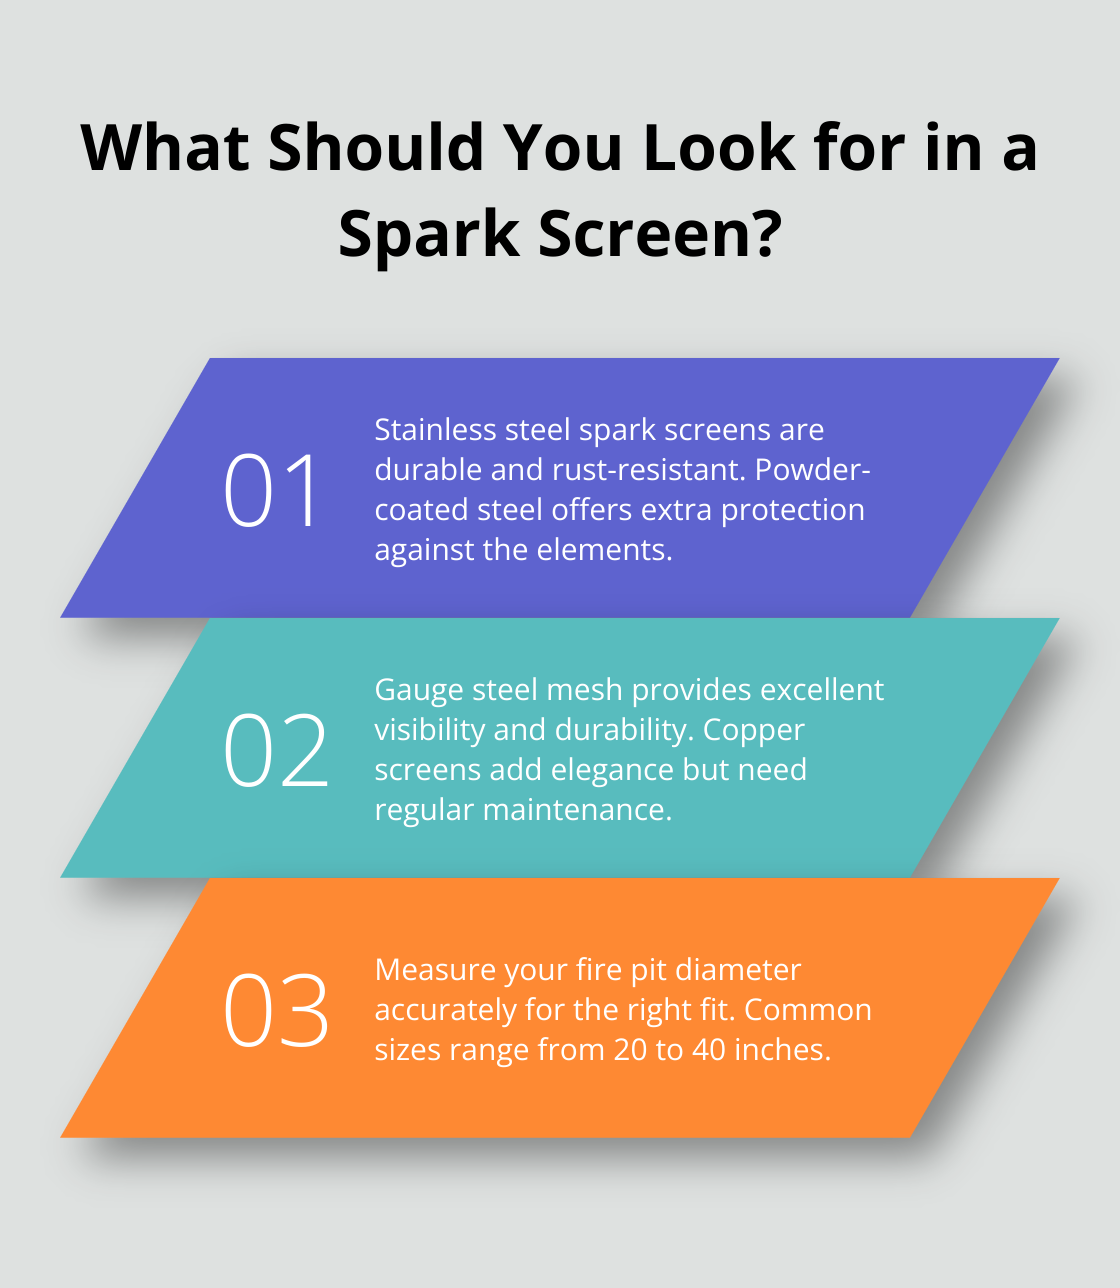 Fact - What Should You Look for in a Spark Screen?